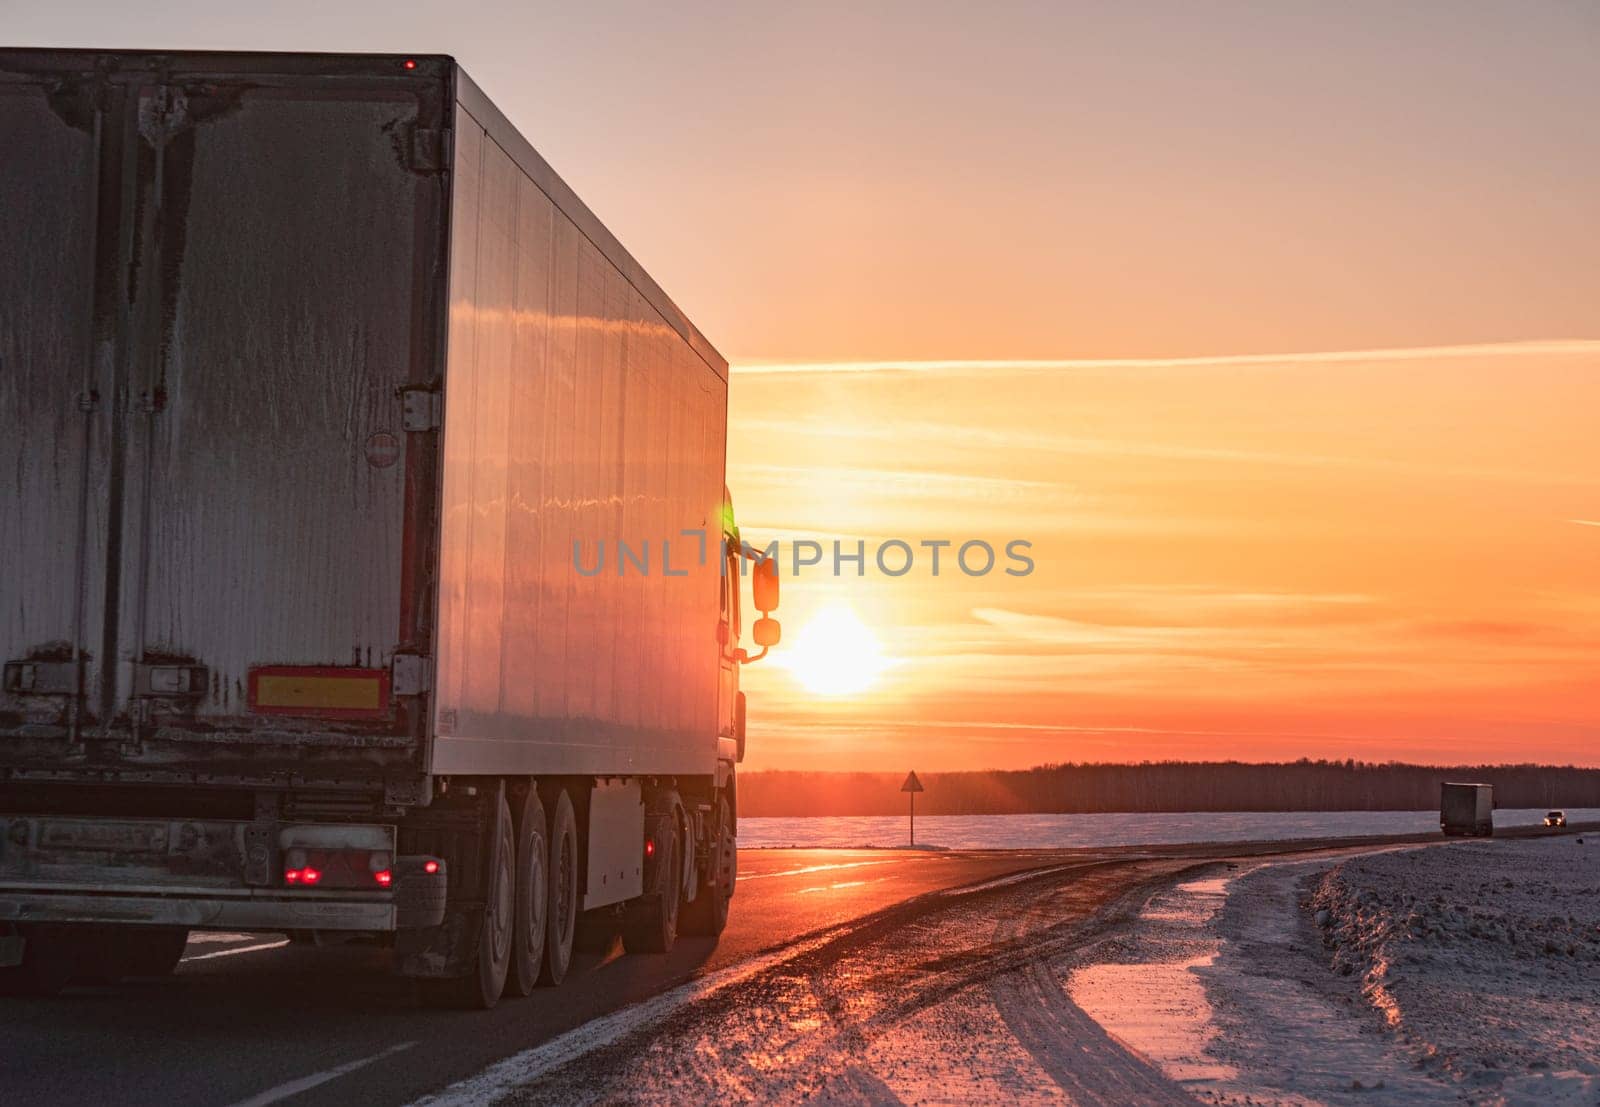 A semi truck cruises down a wintry highway as the sun sets on the horizon, casting a warm glow over the icy road and surrounding landscape.